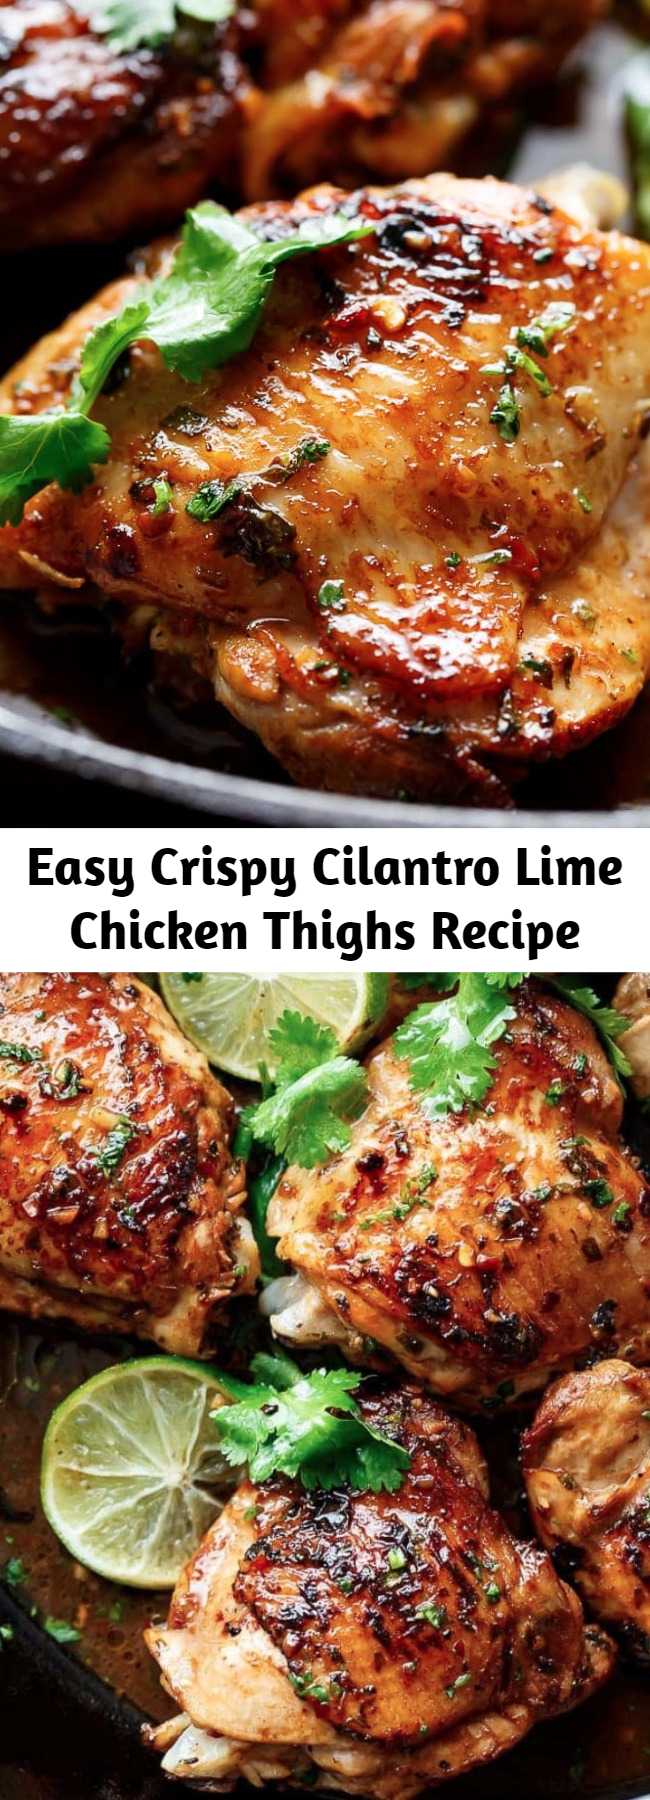 Easy Crispy Cilantro Lime Chicken Thighs Recipe - Cilantro and lime is a classic duo that we can't get enough of. You won't be disappointed. #easy #recipe #cilantro #lime #chicken #dinner #skillet #garlic #cumin #chickenthighs